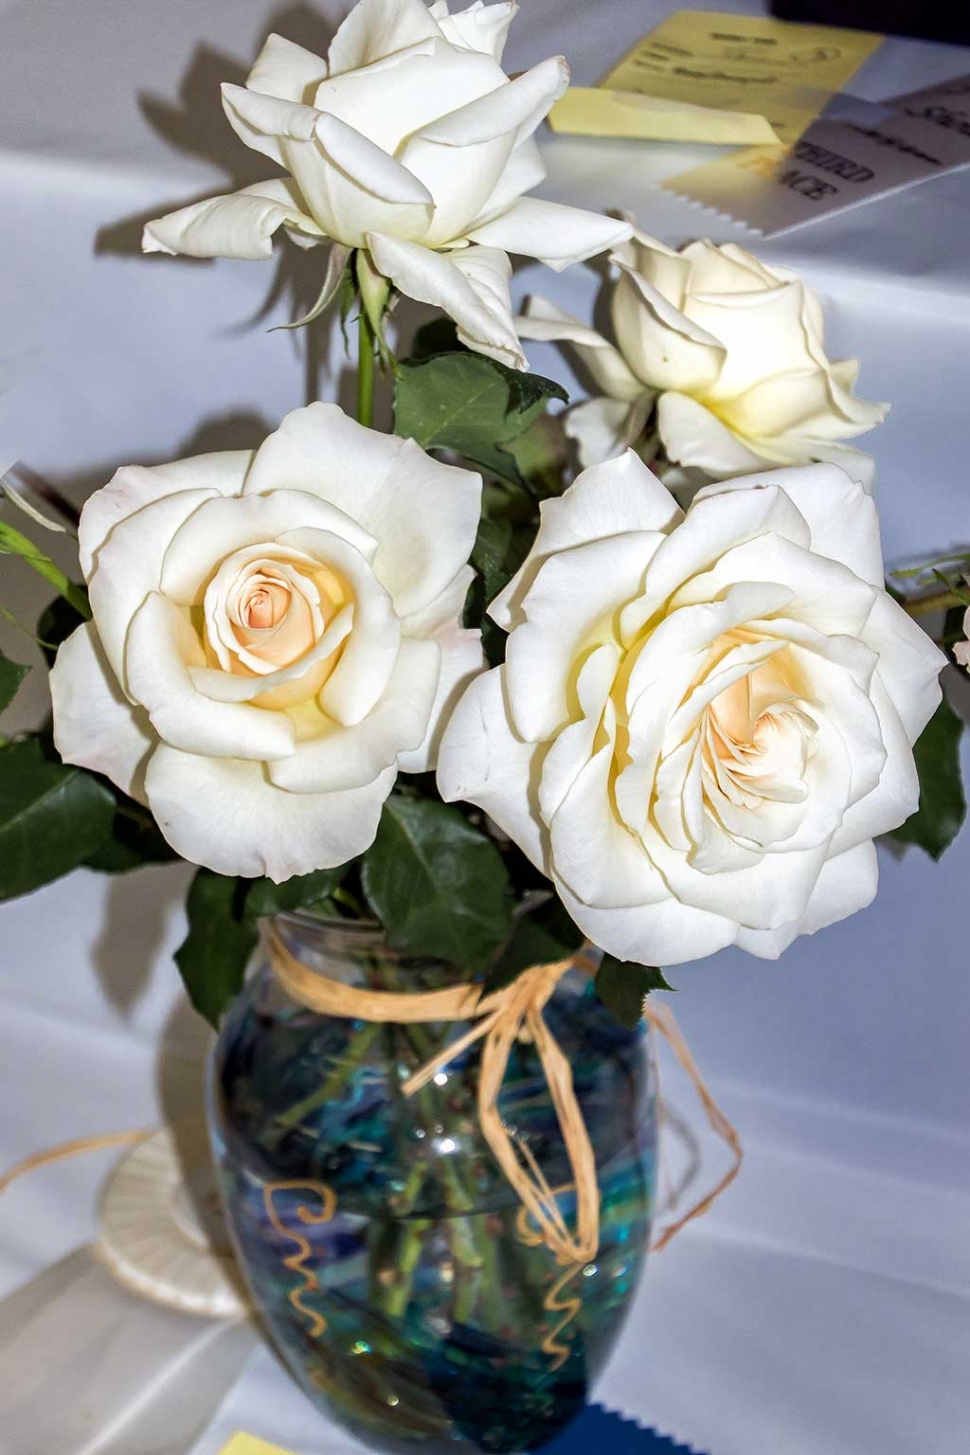 Photo of the Week by Bob Crum. Beautiful white roses displayed at the Fillmore Flower Show. Photo data: ISO 400, 48mm on 16-300mm lens, f/5.0, 1/250 sec.